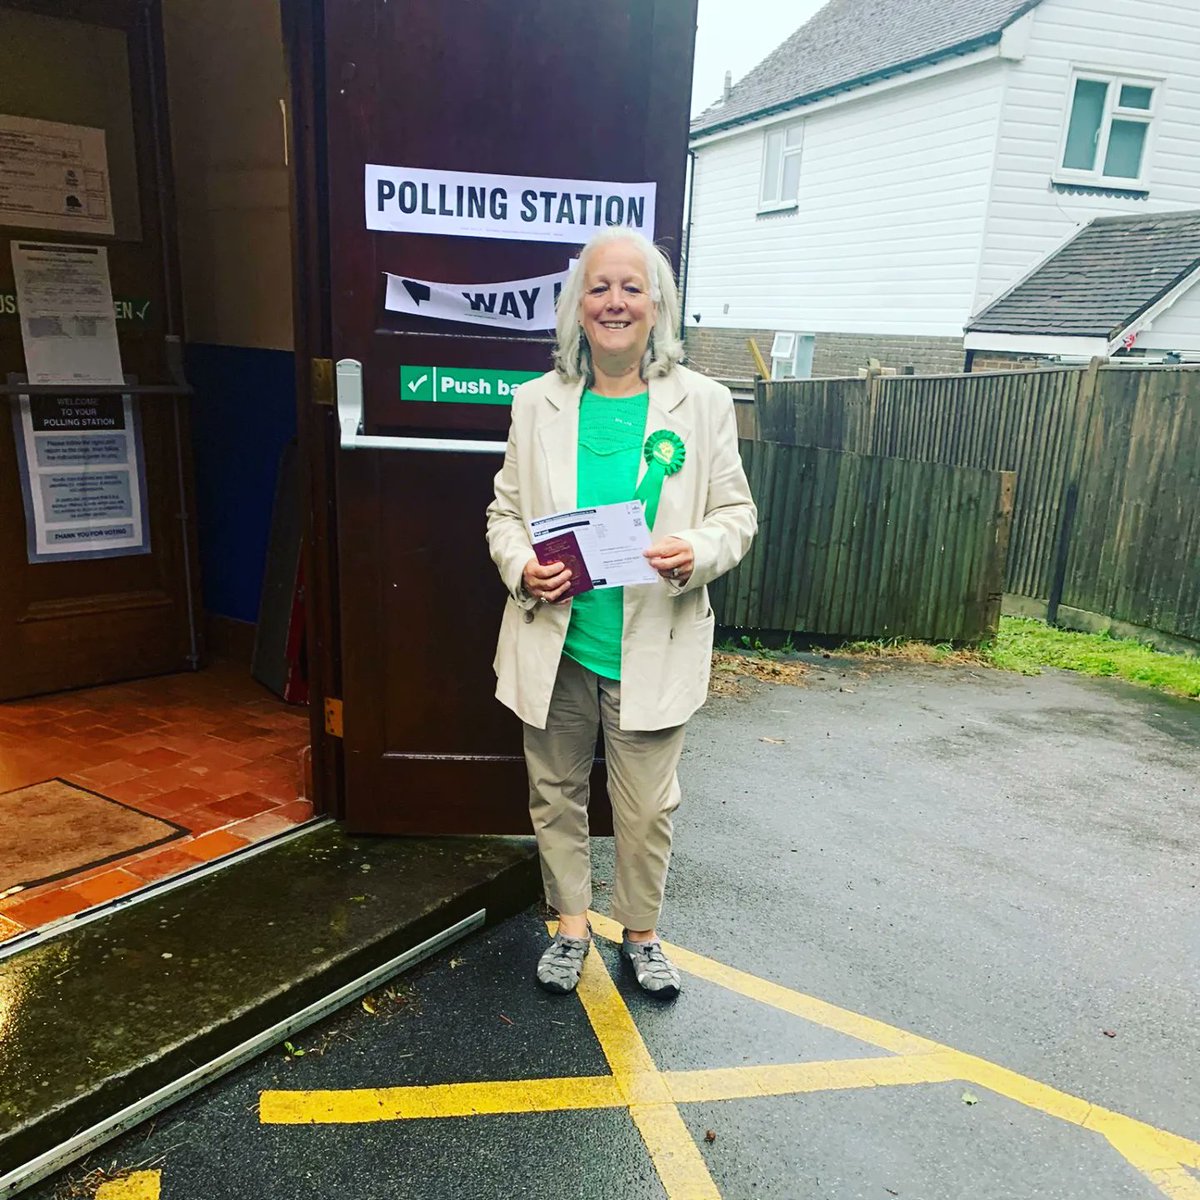 If you live in Heathfield, Mayfield or Five ashes then today's the day to help increase the number of Greens at East Sussex County Council from 4 to 5. Fingers crossed for you Anne. @EastSussexCC @TheGreenParty